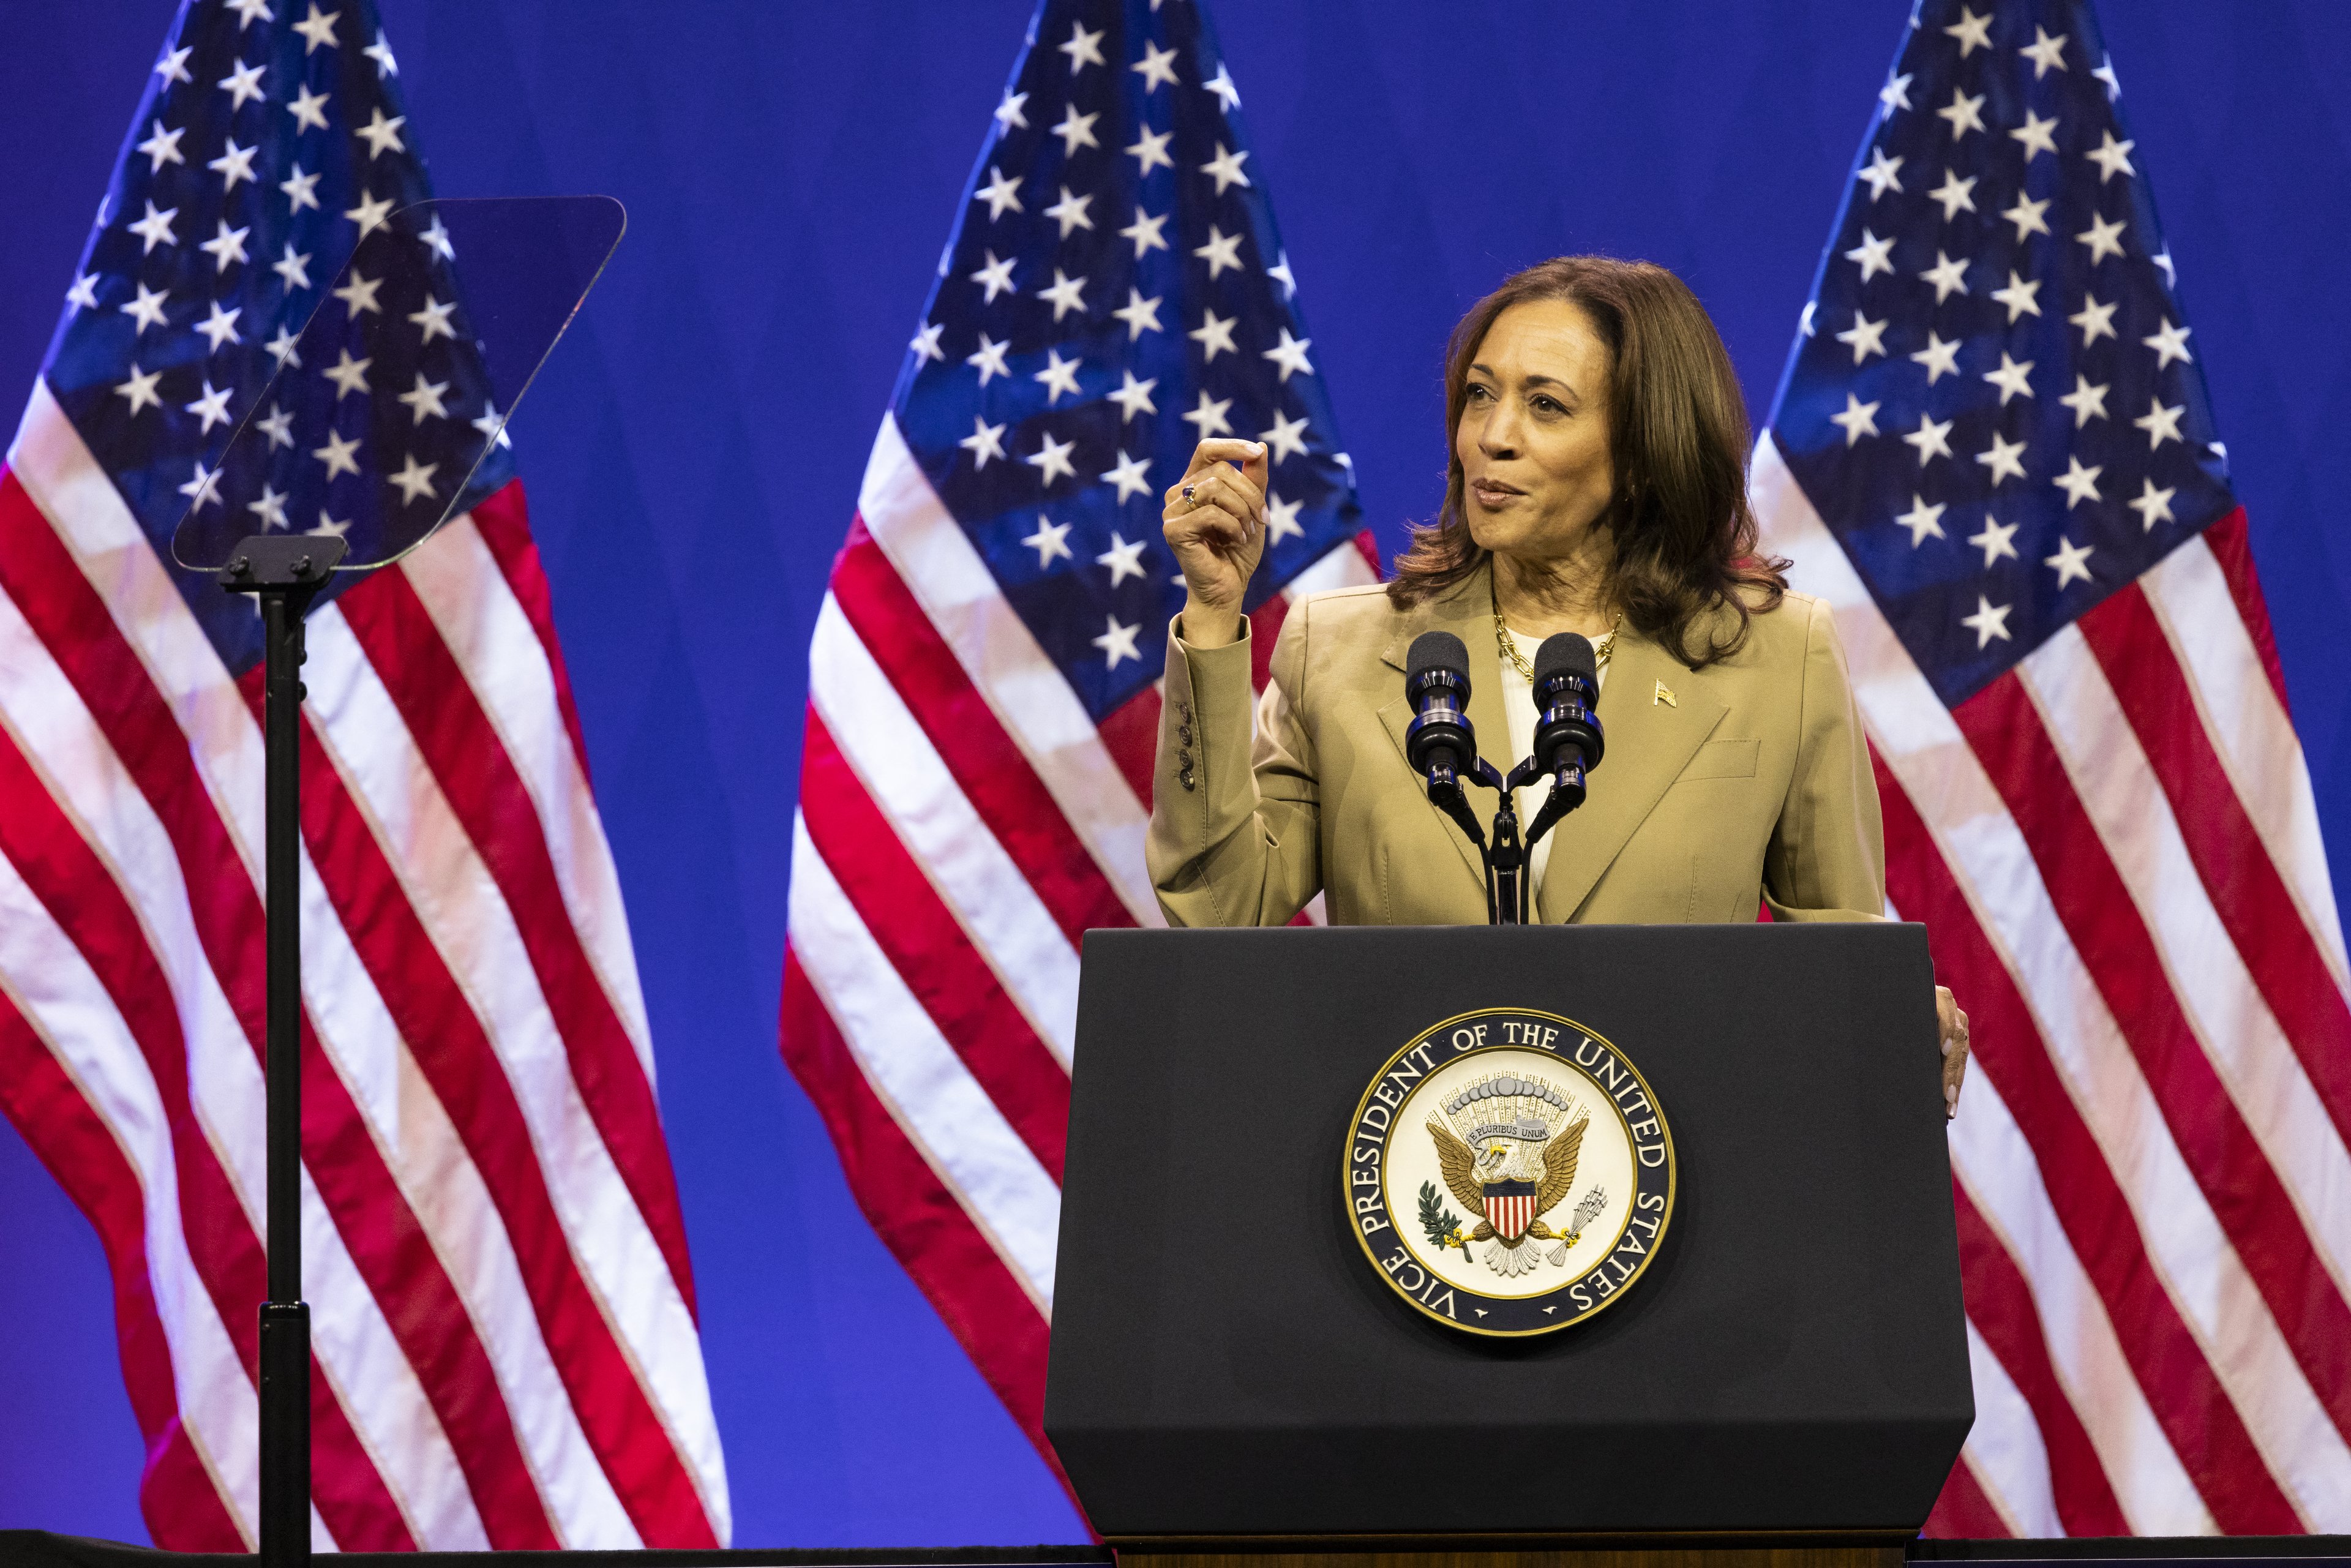 (FILES) US Vice President Kamala Harris speaks at the Asian and Pacific Islander American Vote (APIAVote) Presidential Town Hall in Philadelphia, Pennsylvania, July 13, 2024. Joe Biden on July 21, 2024 dropped out of the US presidential election and endorsed Vice President Kamala Harris as the Democratic Party's new nominee, in a stunning move that upends an already extraordinary 2024 race for the White House. Biden, 81, said he was acting in the "best interest of my party and the country" by bowing to weeks of pressure after a disastrous June debate against Donald Trump stoked worries about his age and mental fitness. (Photo by RYAN COLLERD / AFP)